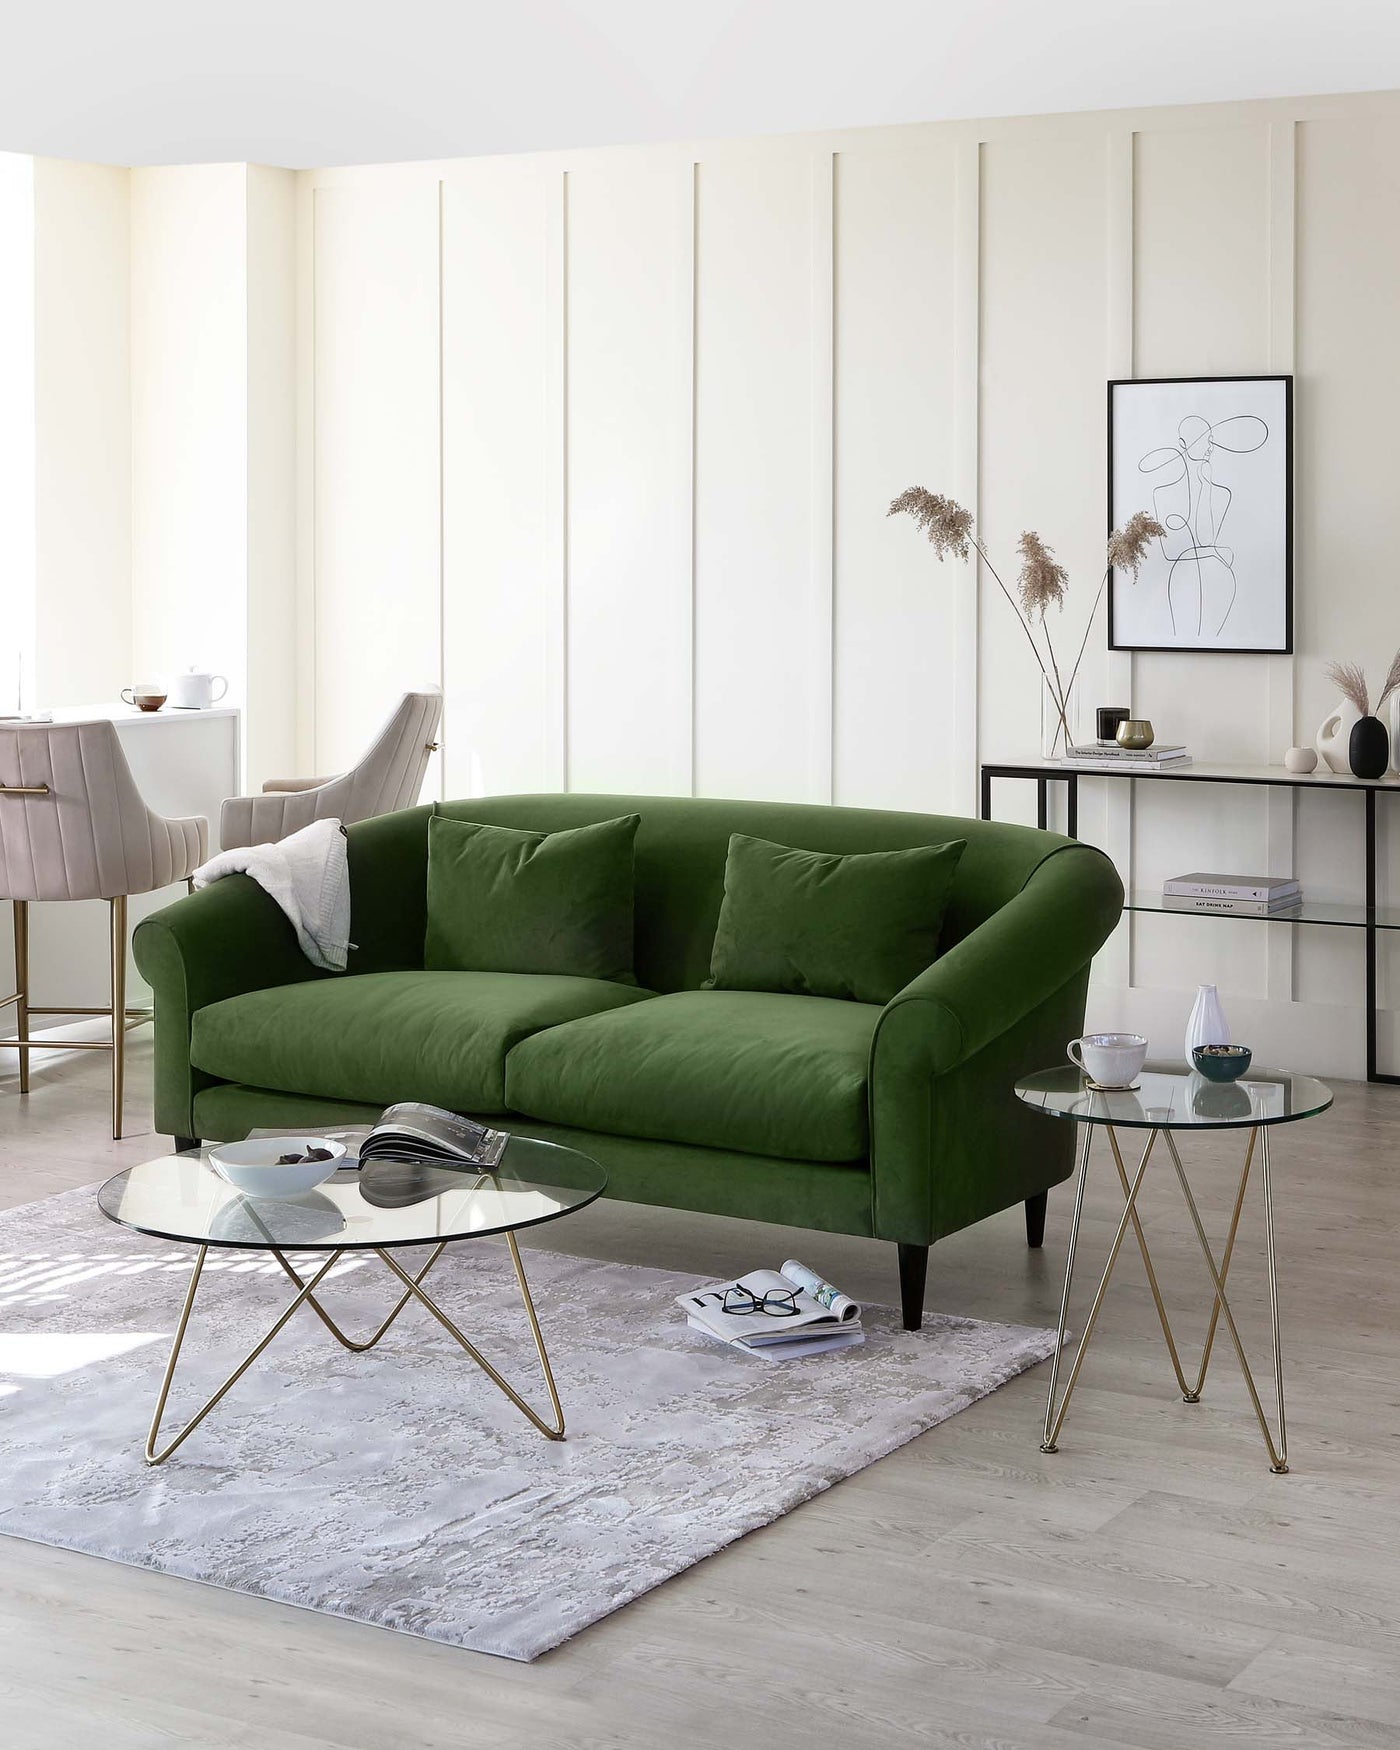 An elegant emerald green velvet sofa with a plush back and seating, accompanied by a pair of modern round glass-top side tables with golden metal legs. The room is further accented by a soft textured white area rug beneath the furniture.